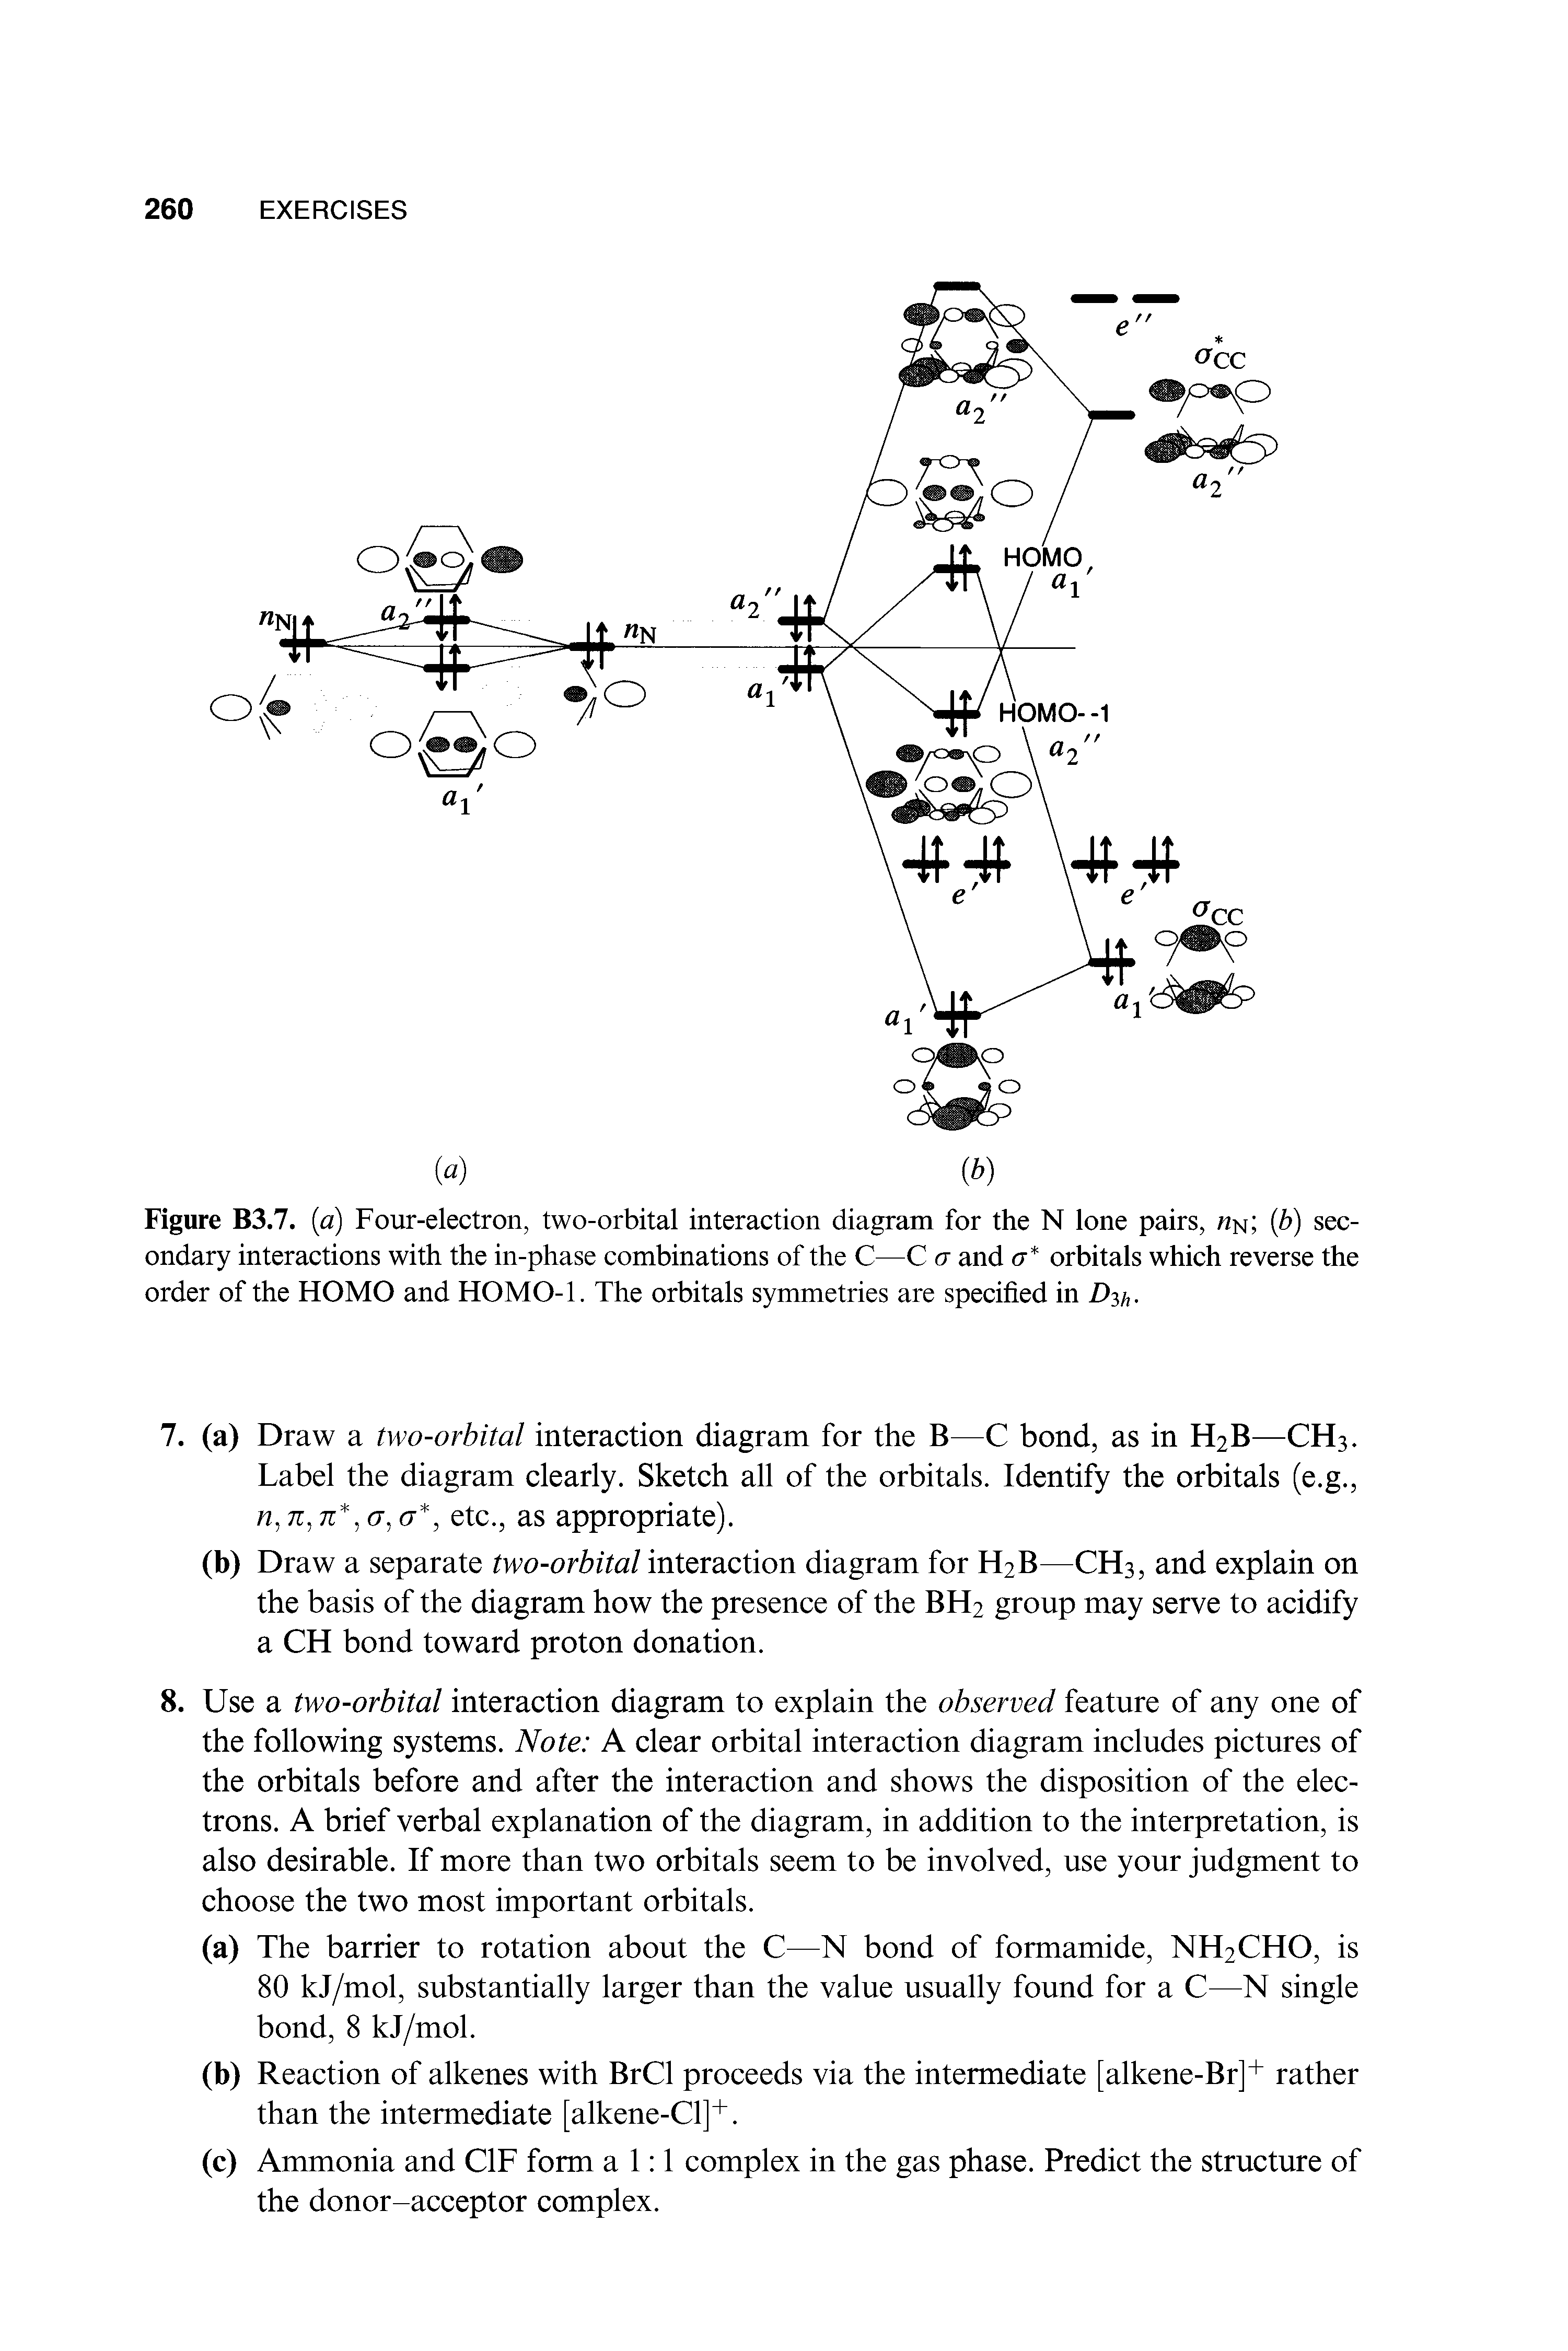 Figure B3.7. (a) Four-electron, two-orbital interaction diagram for the N lone pairs, nn (b) secondary interactions with the in-phase combinations of the C—C a and a orbitals which reverse the order of the HOMO and HOMO-1. The orbitals symmetries are specified in D h-...